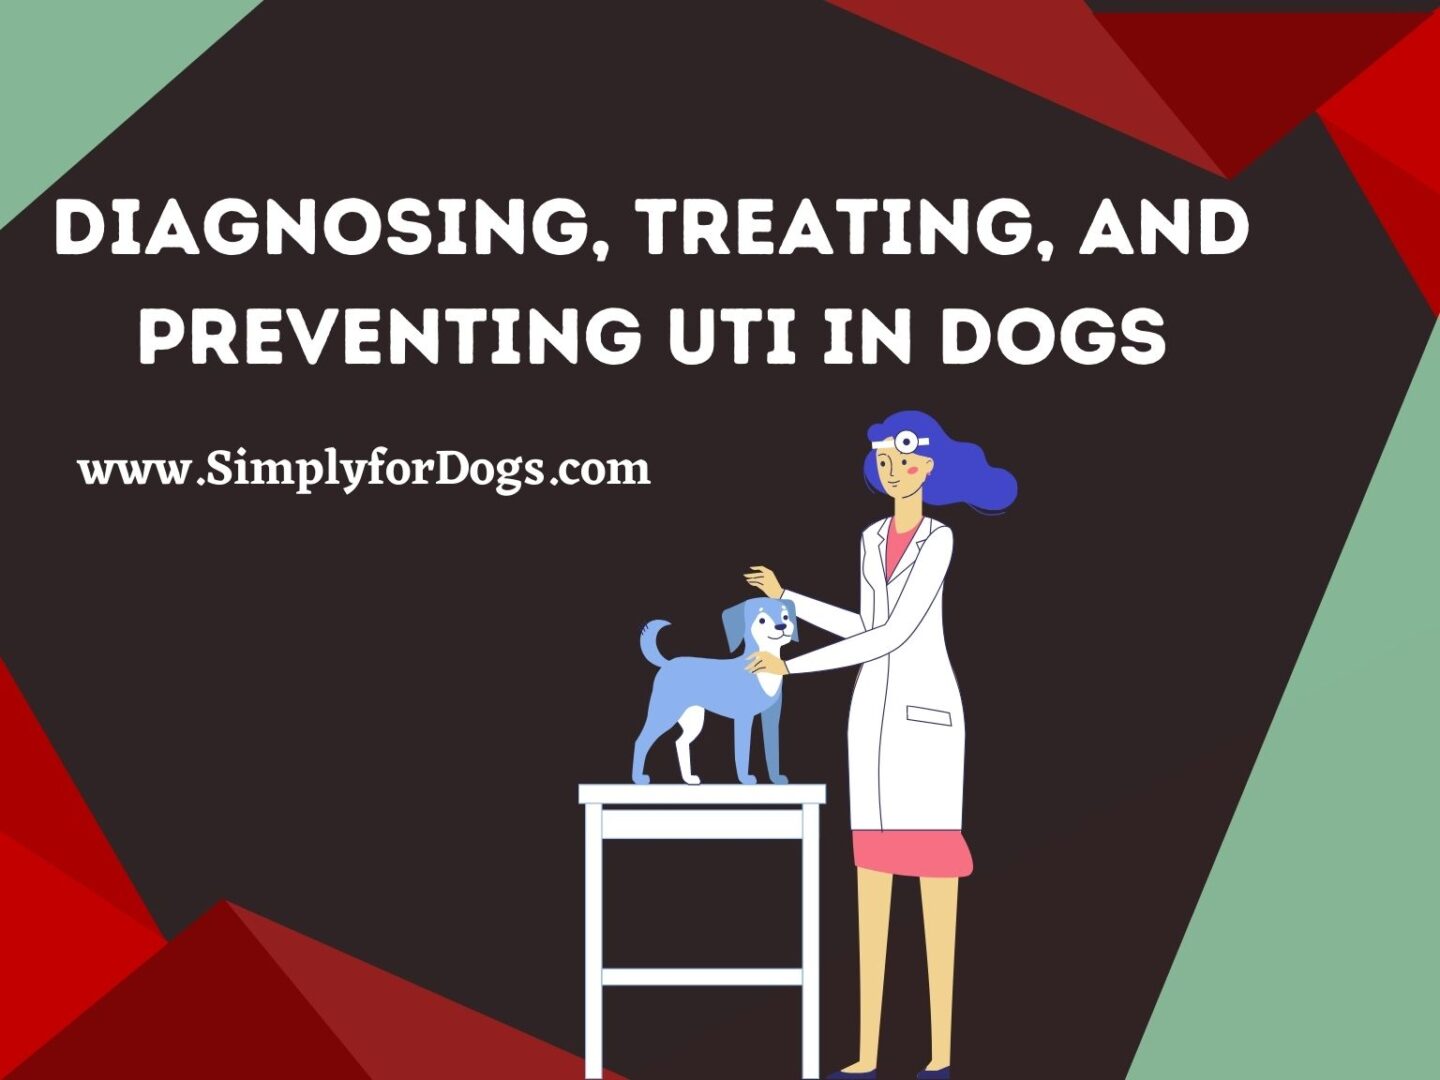 Diagnosing, Treating, and Preventing UTI in Dogs